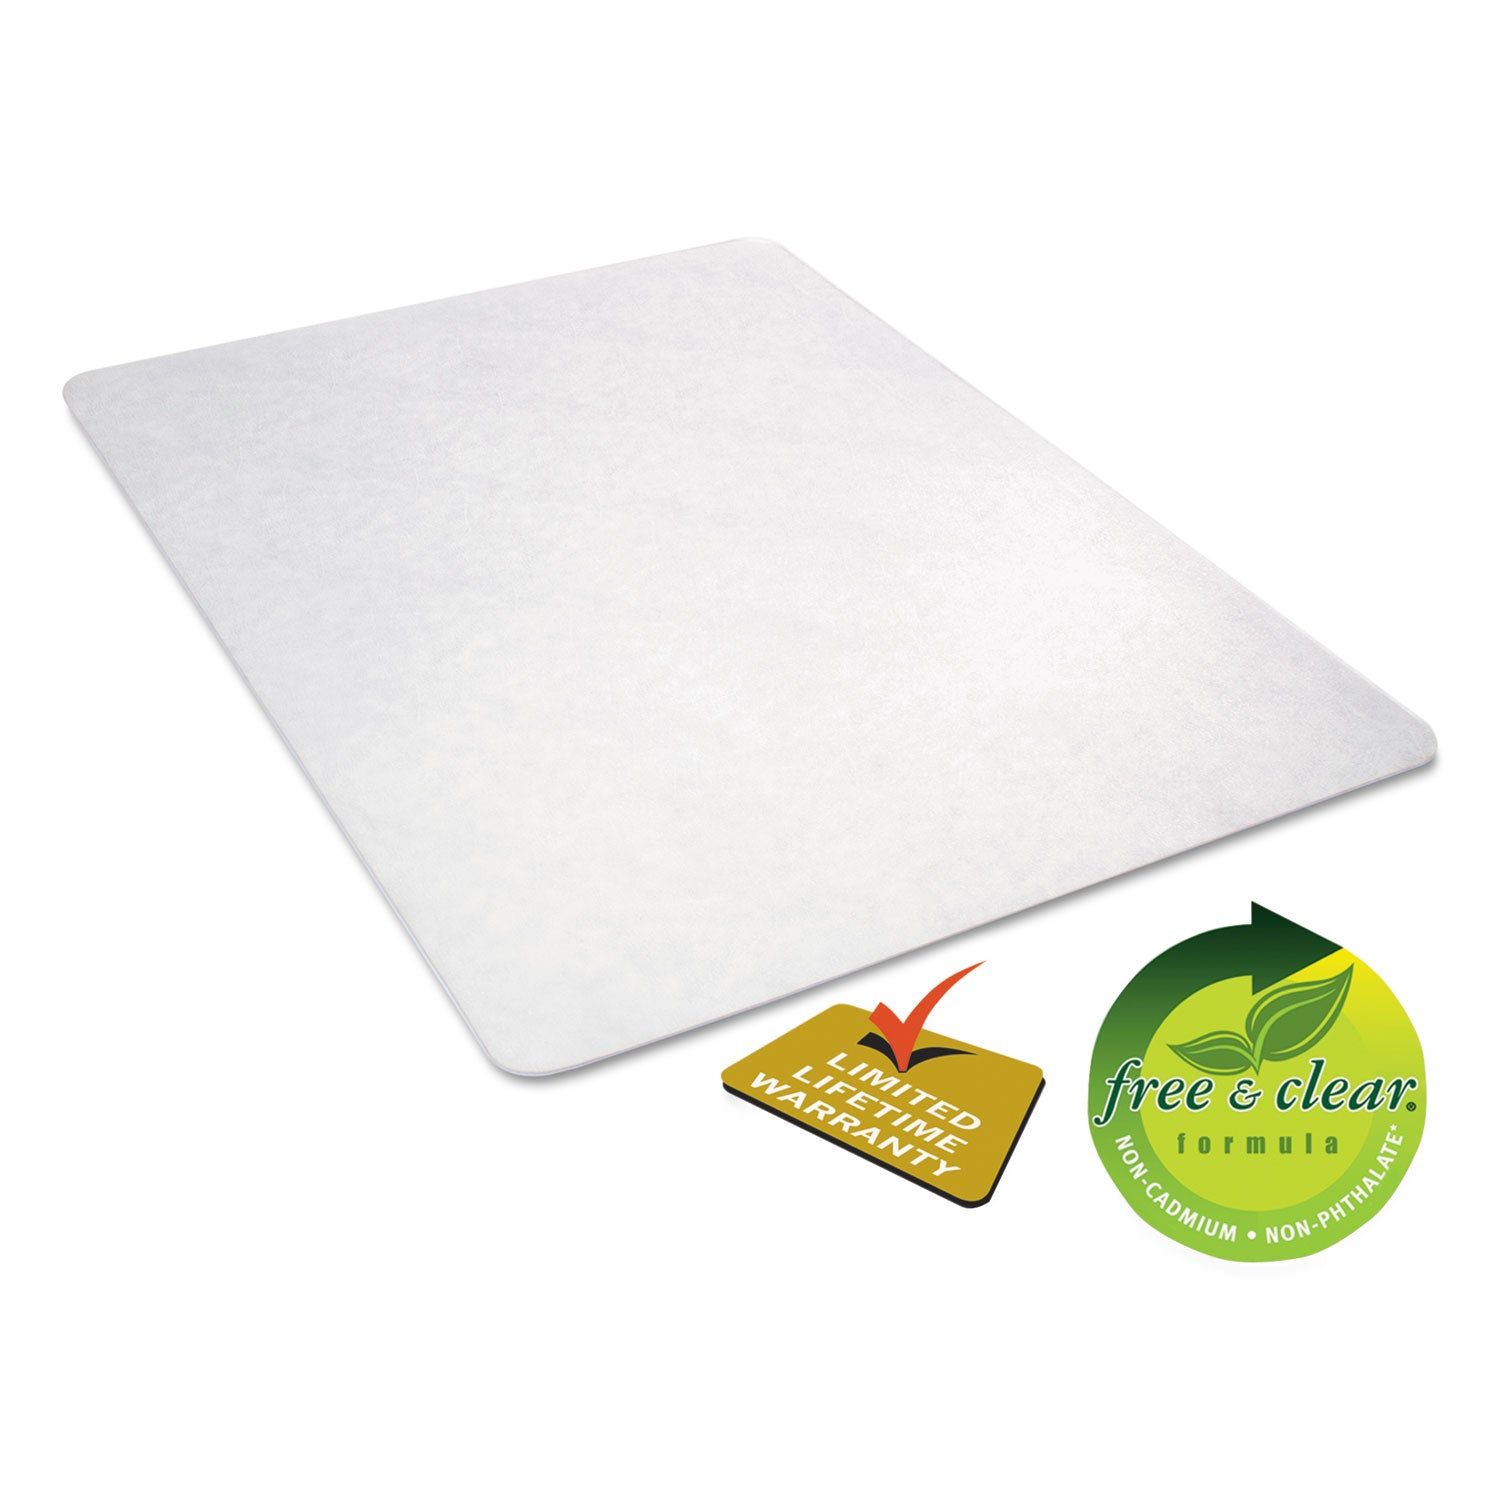 economat-all-day-use-chair-mat-for-hard-floors-rolled-packed-45-x-53-clear_defcm21242com - 5